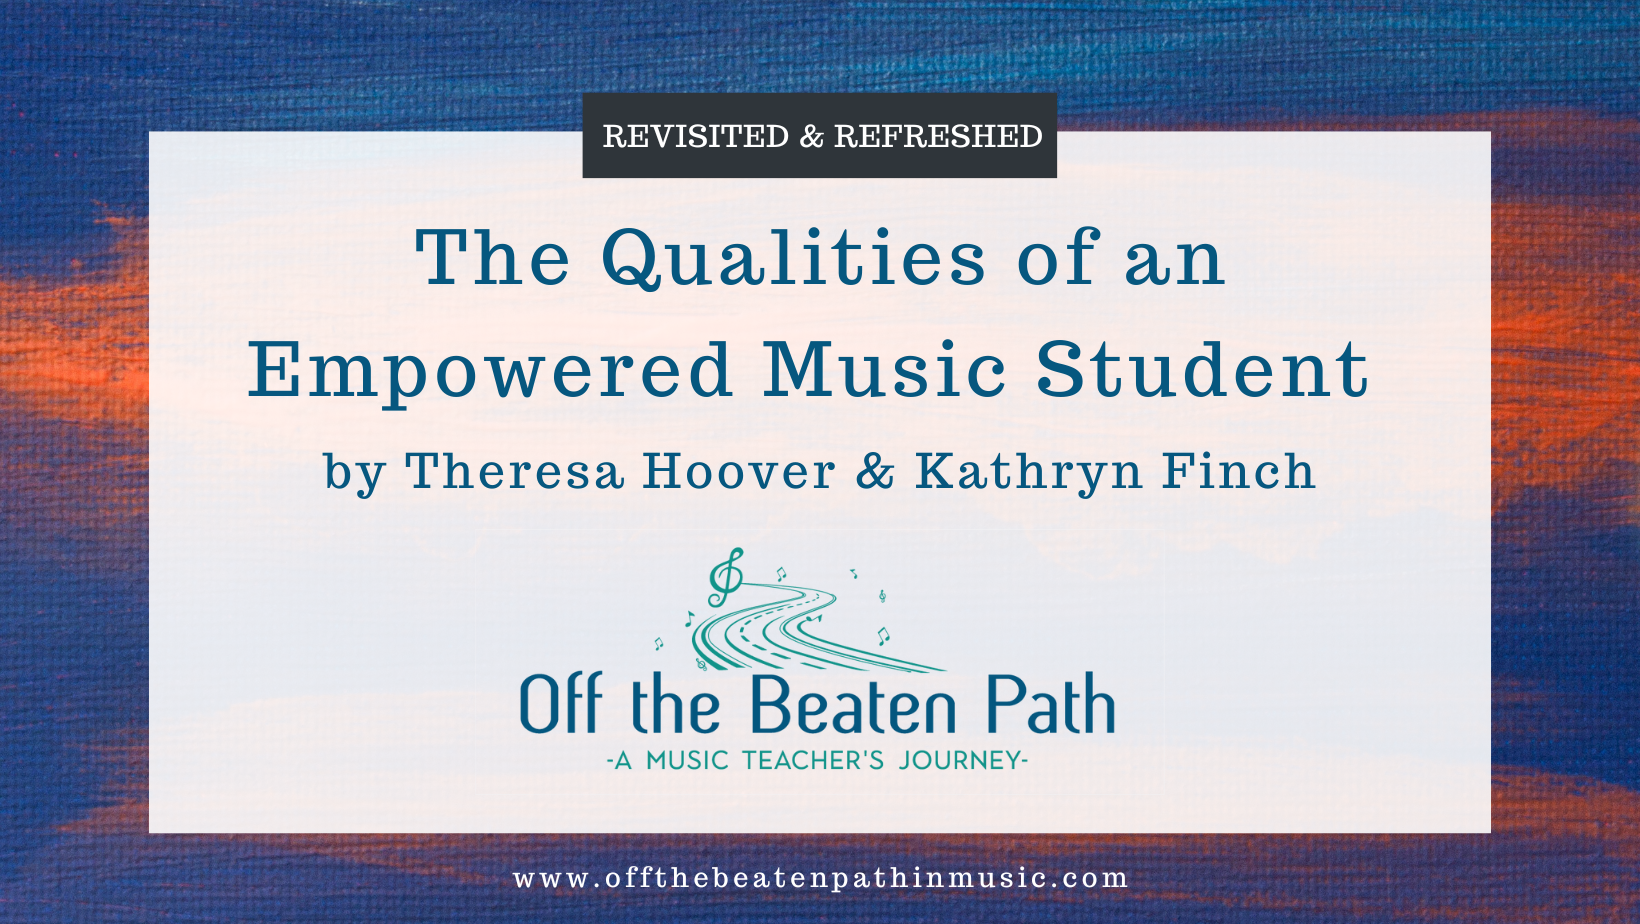 The qualities of an empowered music student